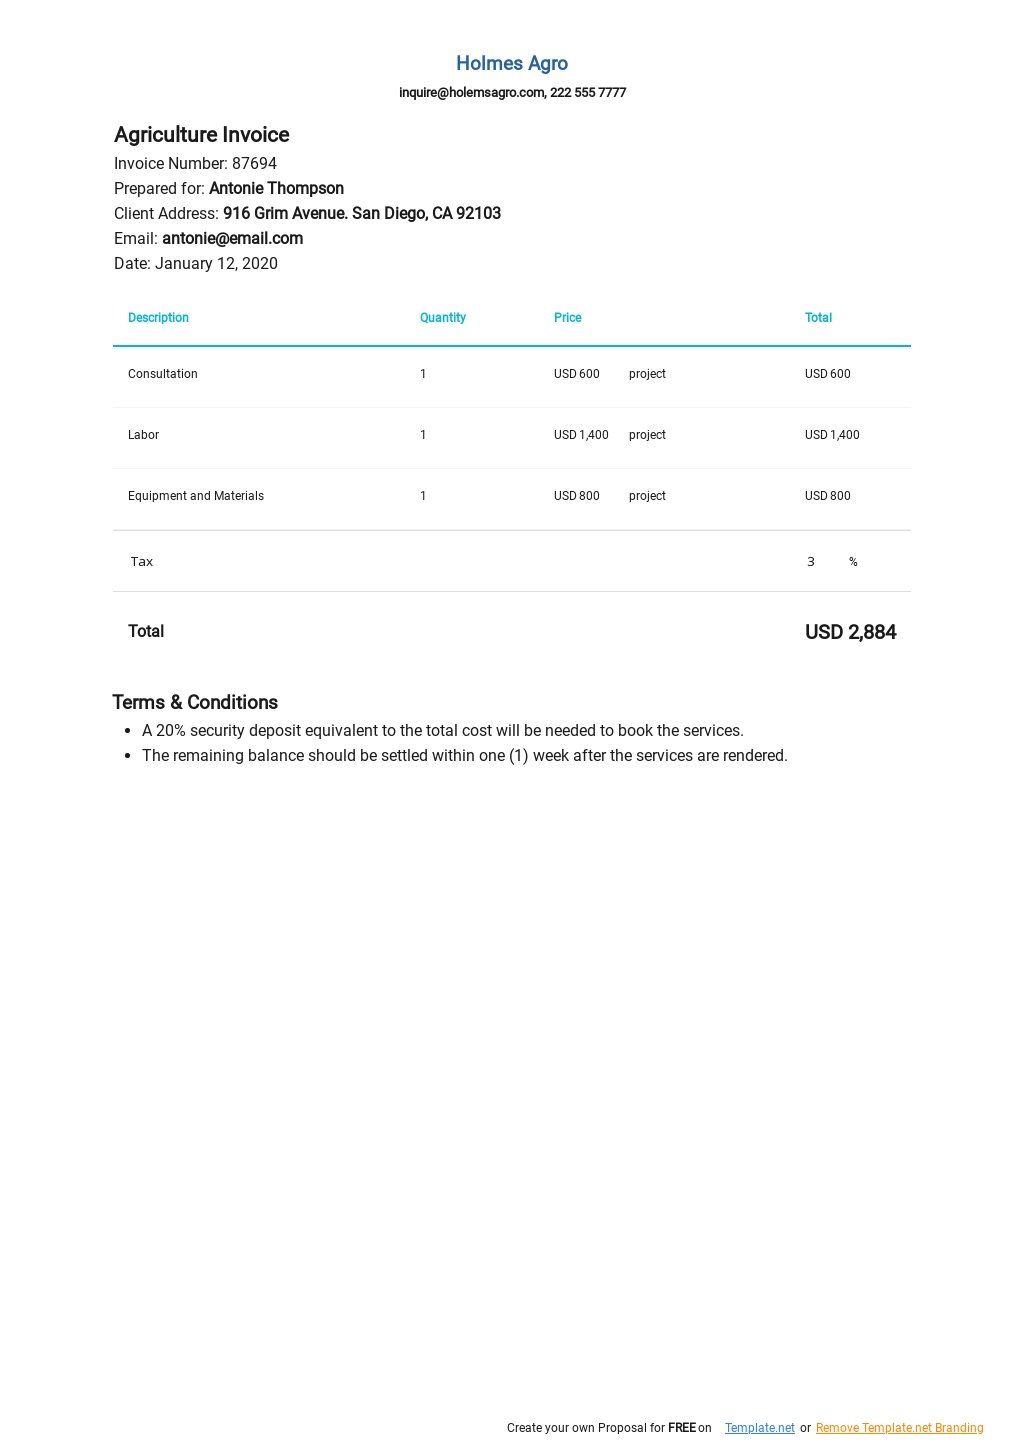 Agriculture Invoice Template Free PDF Google Docs Excel Word